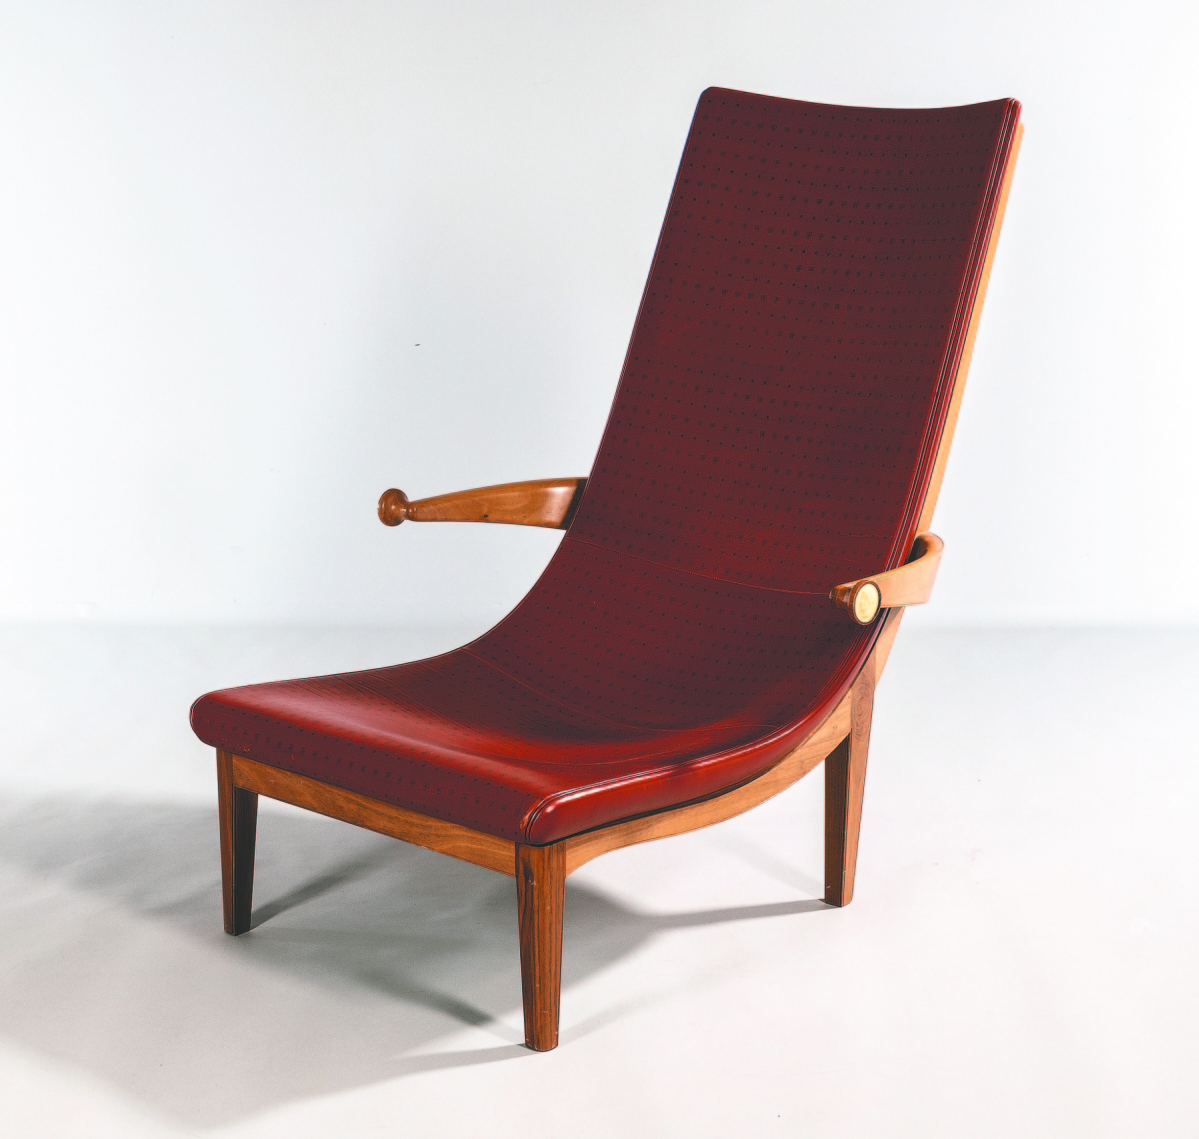 The “Senna” lounge chair was designed by Erik Gunnar Asplund in 1925 for the Swedish Pavilion at the International Exhibition of Decorative Arts in Paris. It was rereleased by Cassina in 1983. The sides of armrests are adorned with a classical relief bust like that of a Greek or Roman coin. It sold for $13,750.